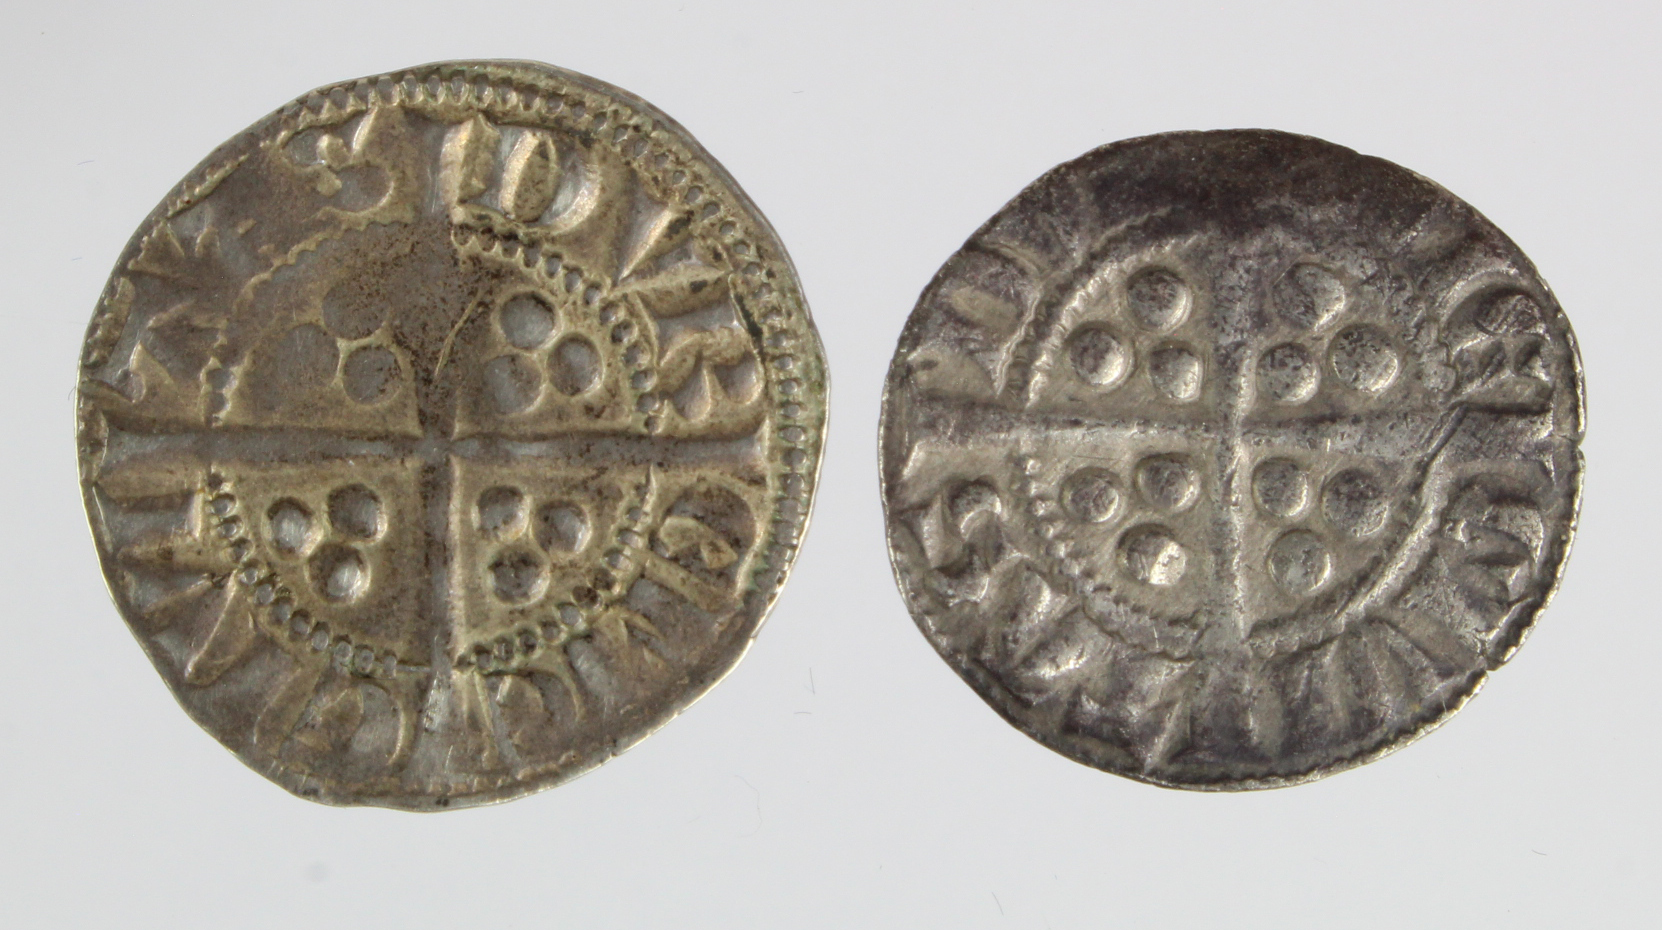 Edward I Durham silver pennies (2): Class 2b aVF, and Class 3b nVF; with tickets/provenances. - Image 2 of 2